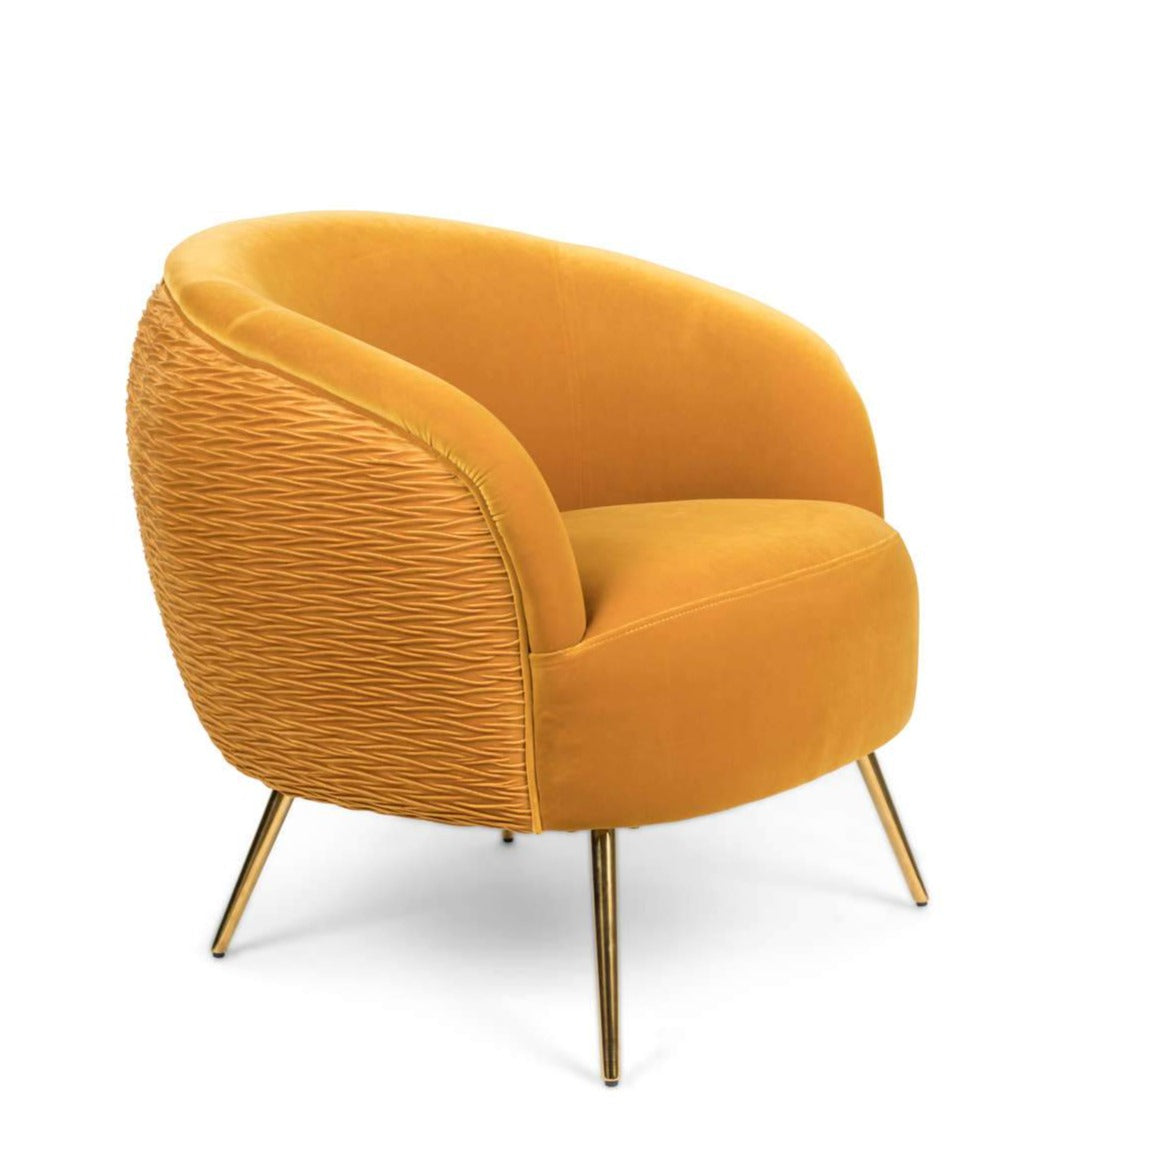 Seating armchair with personality. Rich, velvety upholstery, impeccable rounding and textured backrest: Bold Monkey So Curvy holiday armchair should not sit quietly in the corner. It is an armchair that attracts attention. Thin, slender brass legs balance the excessive shape of the chair, embedding it in tasteful design. Alone or as a pair, the Bold Monkey So Curvy armchair is a visual reference point for each living room space.